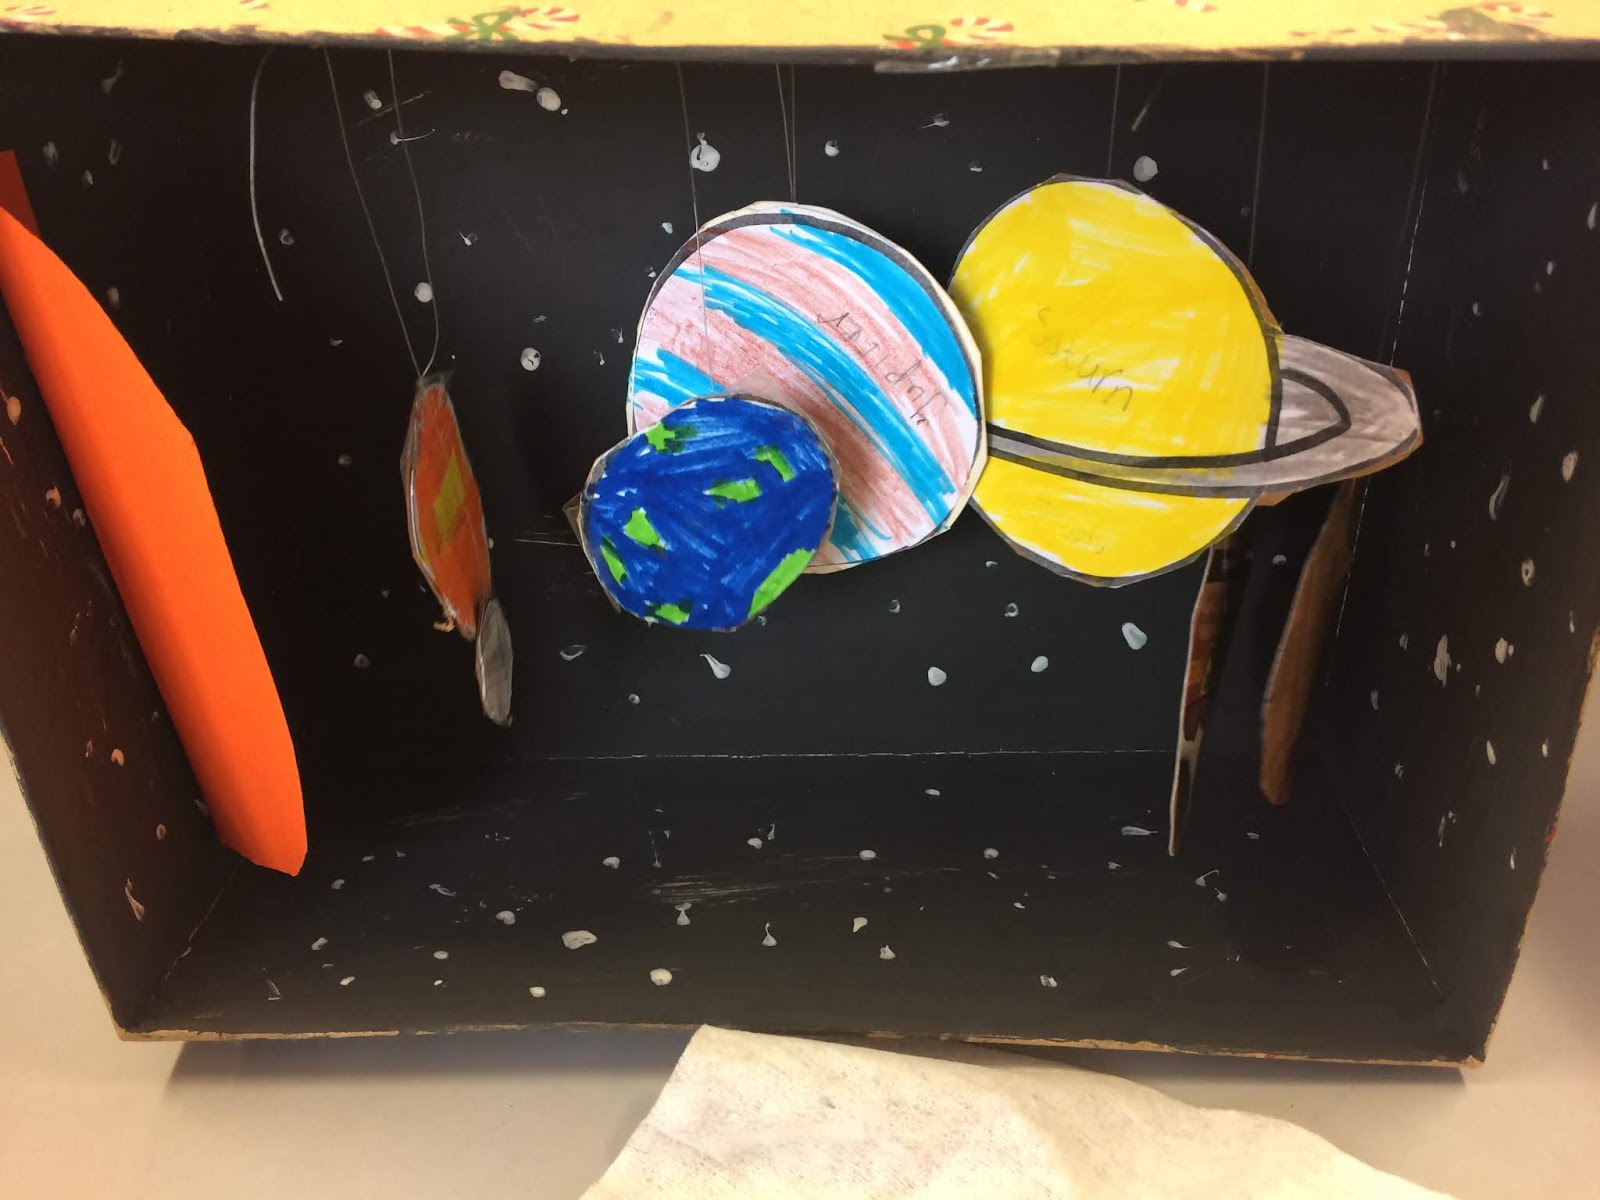 Come to Room 21. We are great fun!: Solar System Dioramas